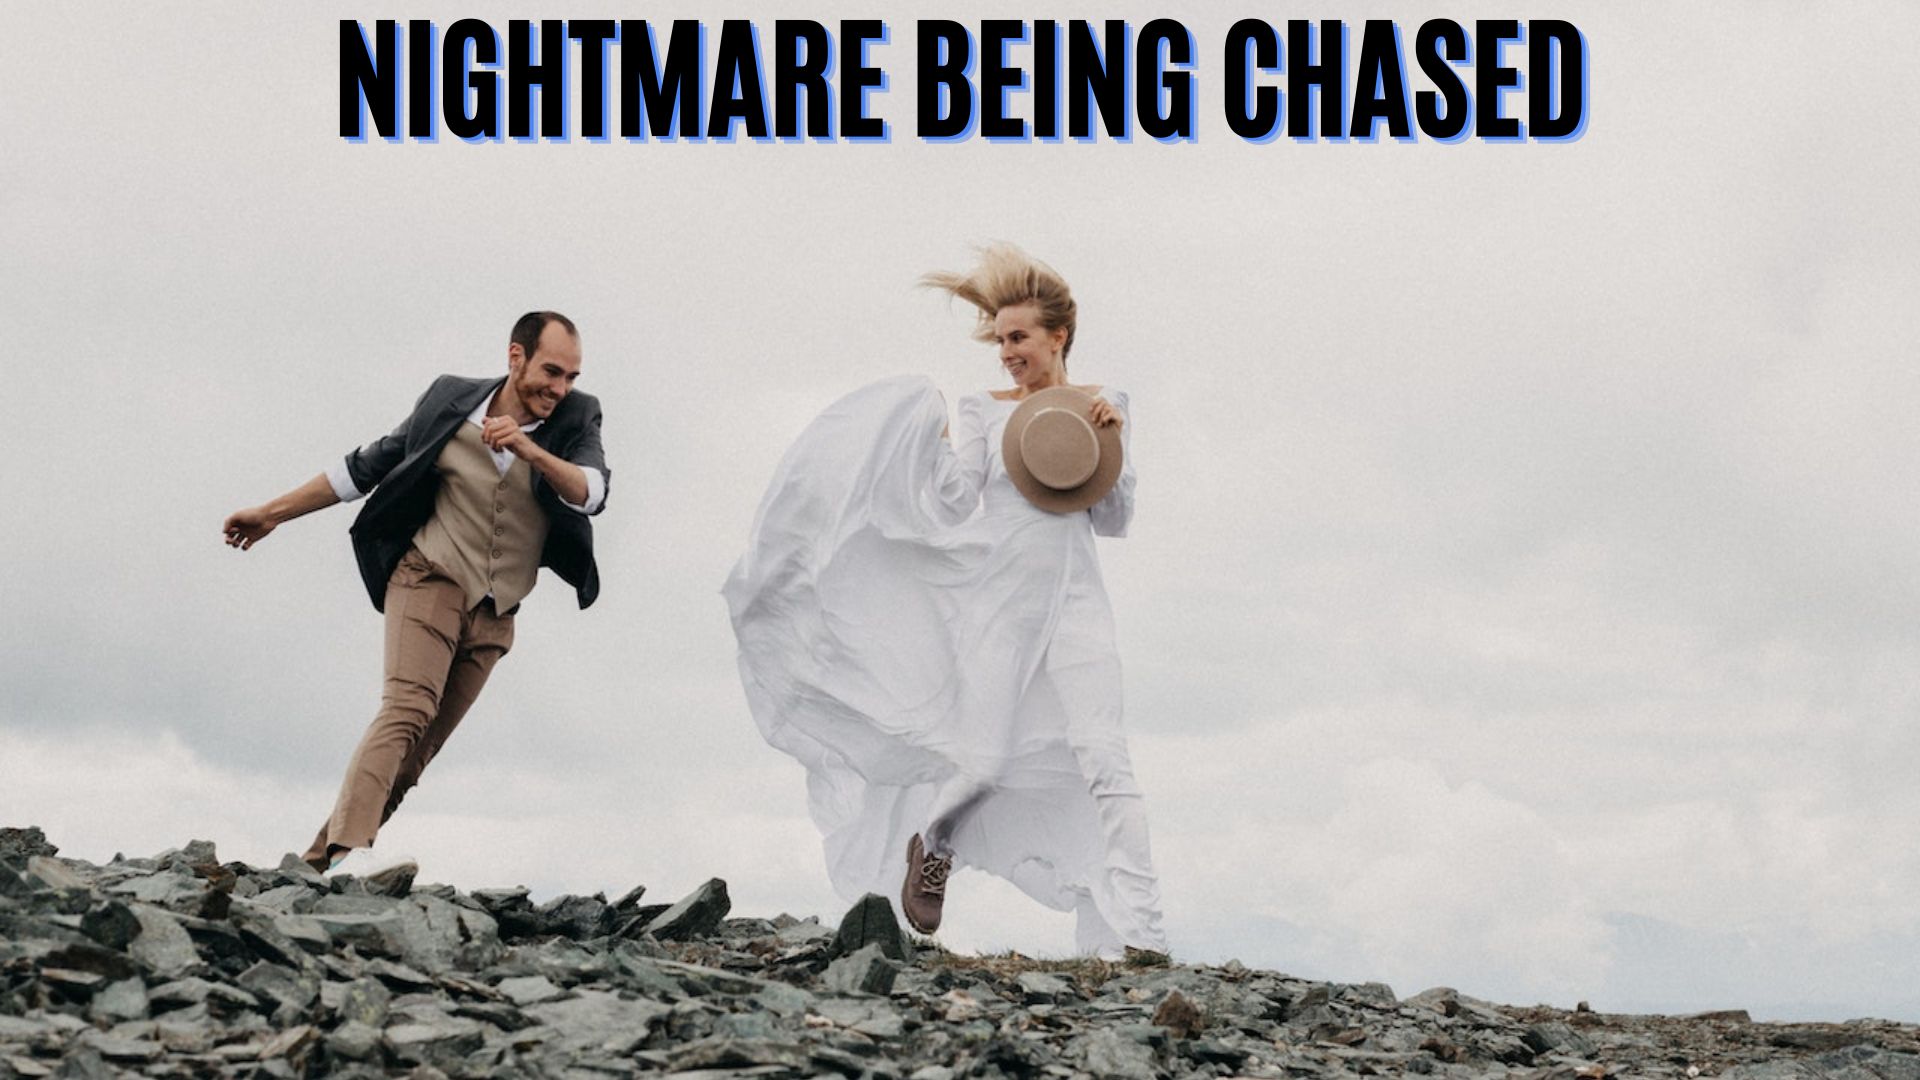 Nightmare Being Chased - Often Reflects Our Own Emotions